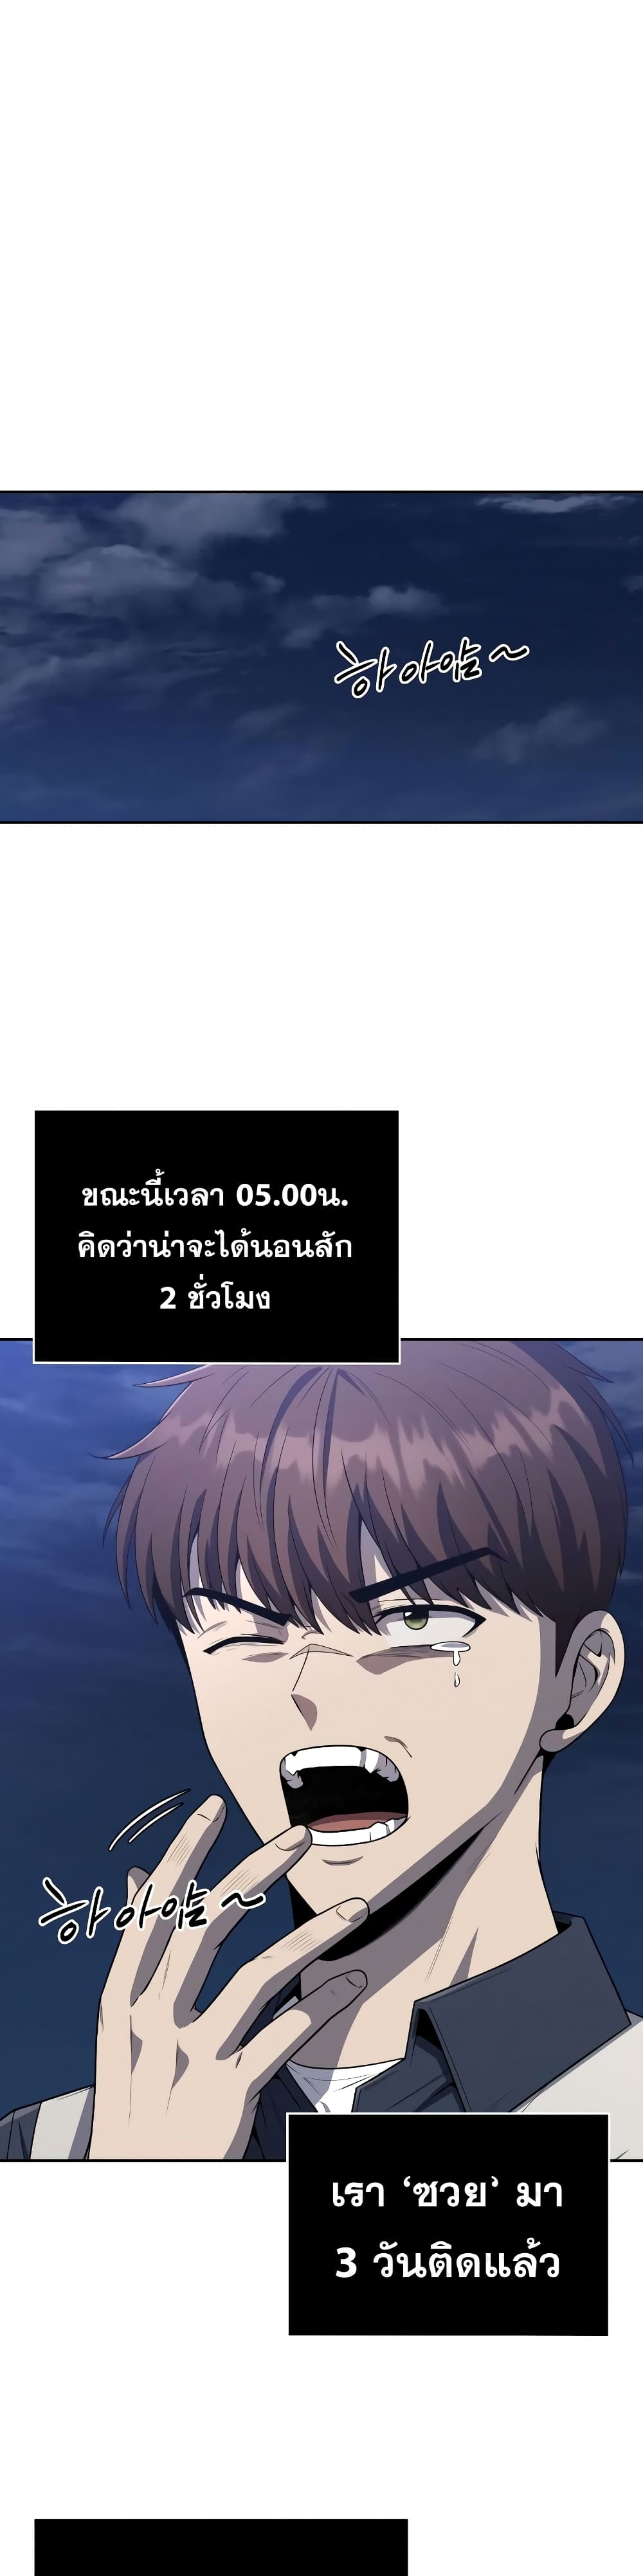 Clever Cleaning Life Of The Returned Genius Hunter ตอนที่ 6 (2)